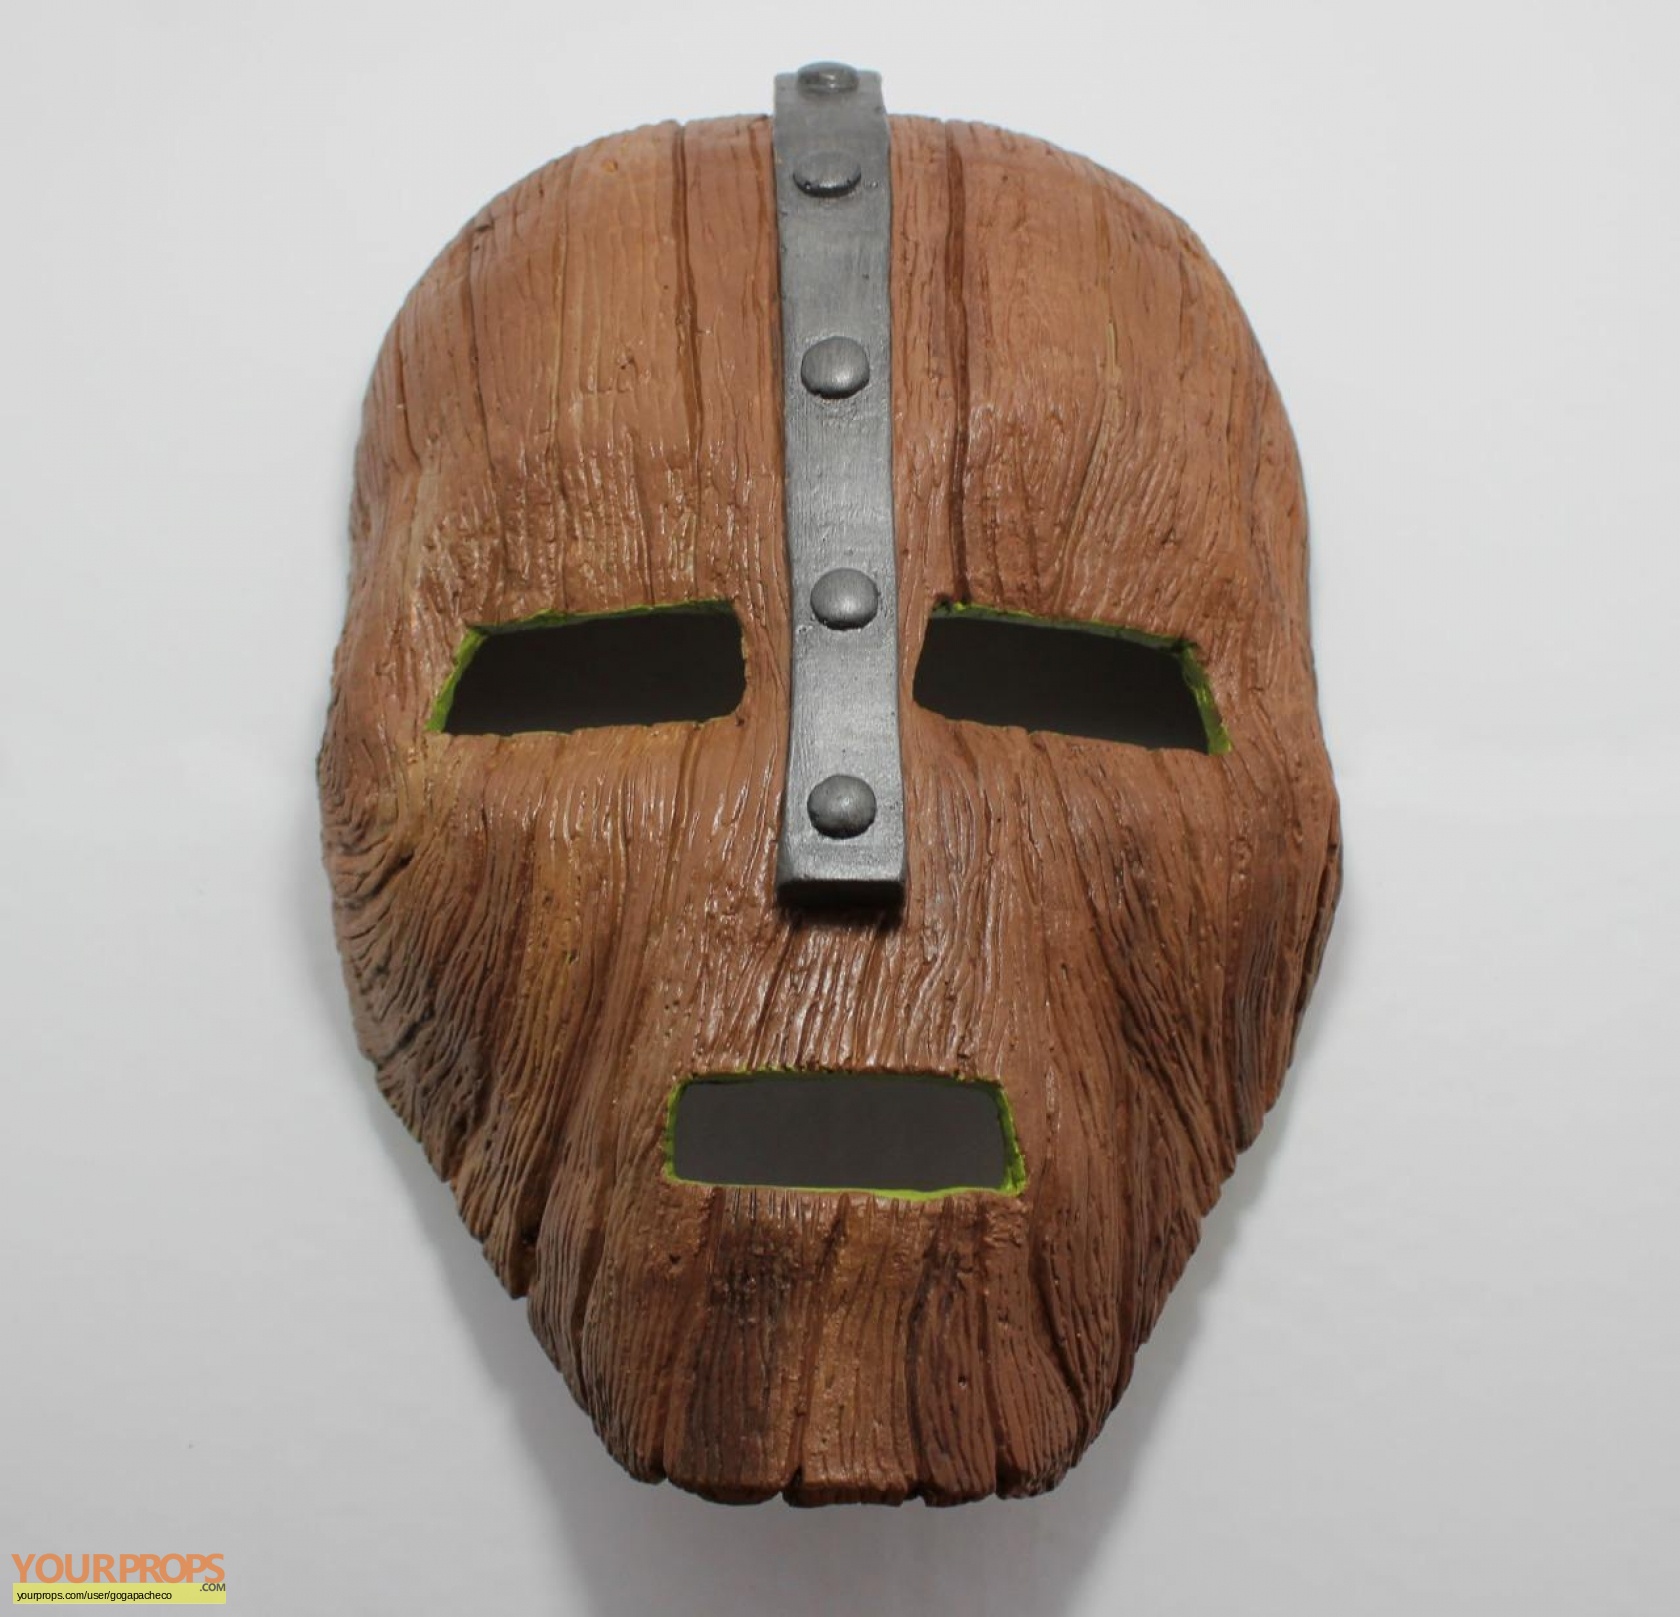 The Mask the mask replica movie prop